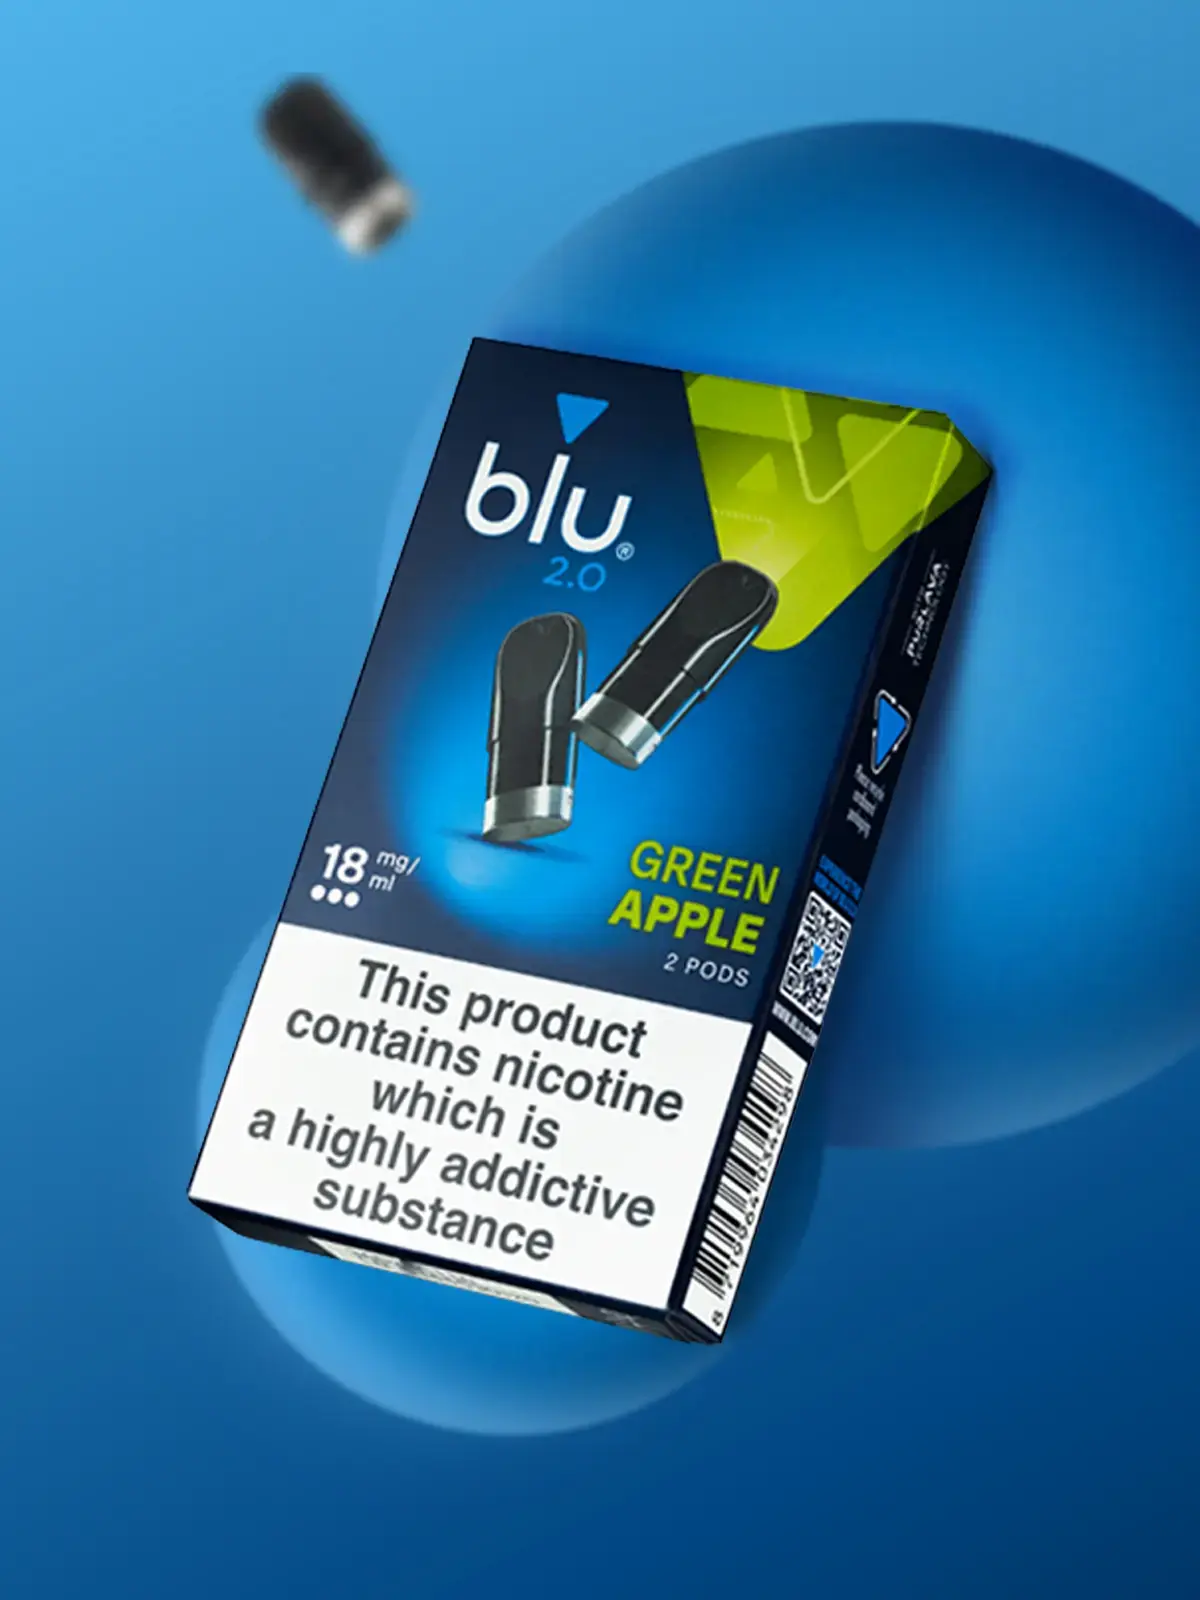 A pack of 18mg/ml blu 2.0 pods in Green Apple flavour floating in front of a stylised blue background